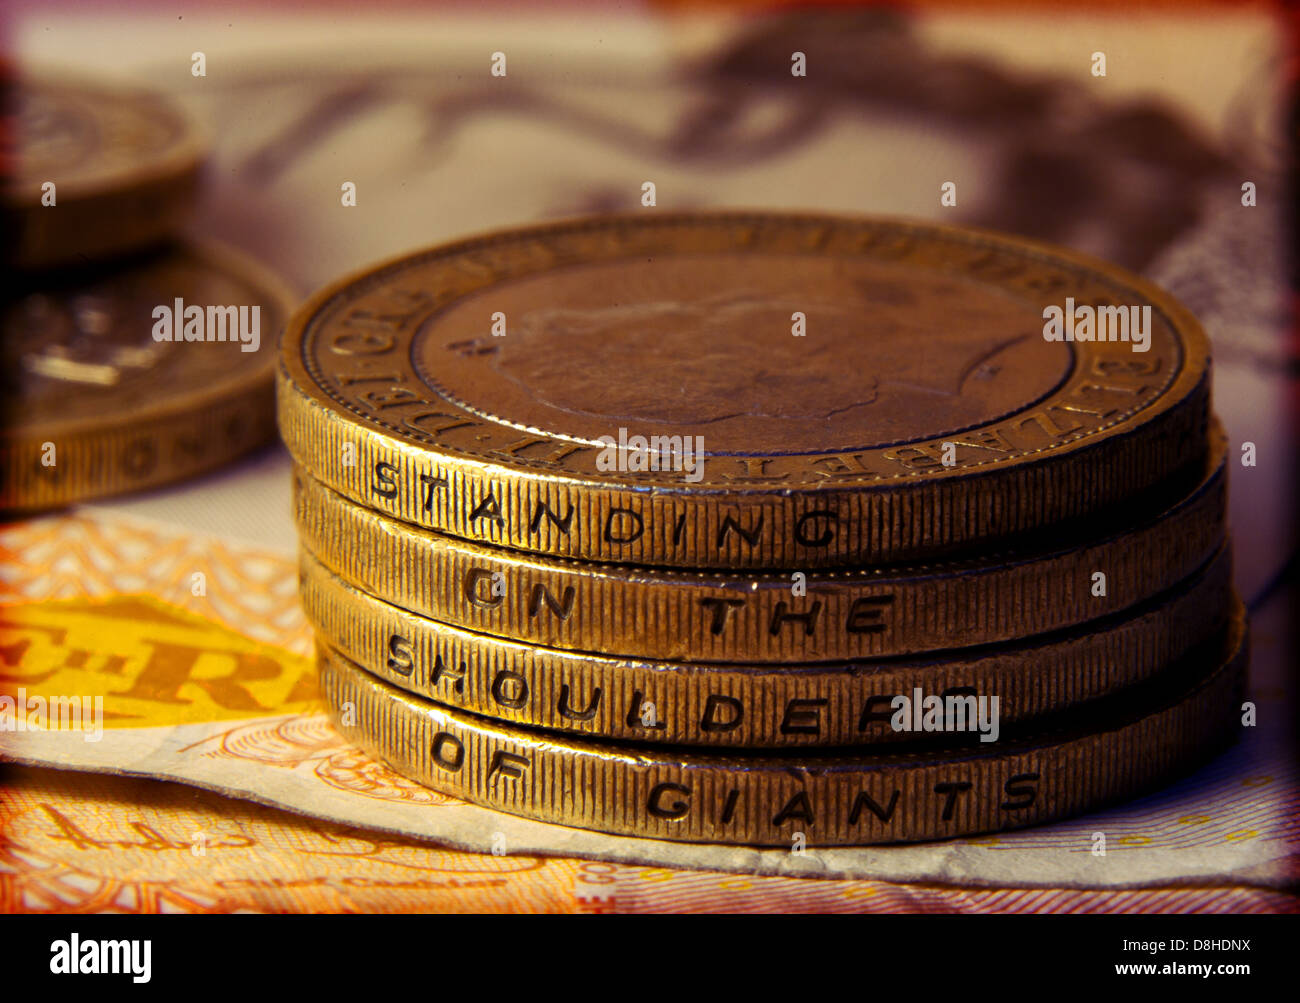 British two pound coins showing the words Standing on the shoulder of giants Stock Photo